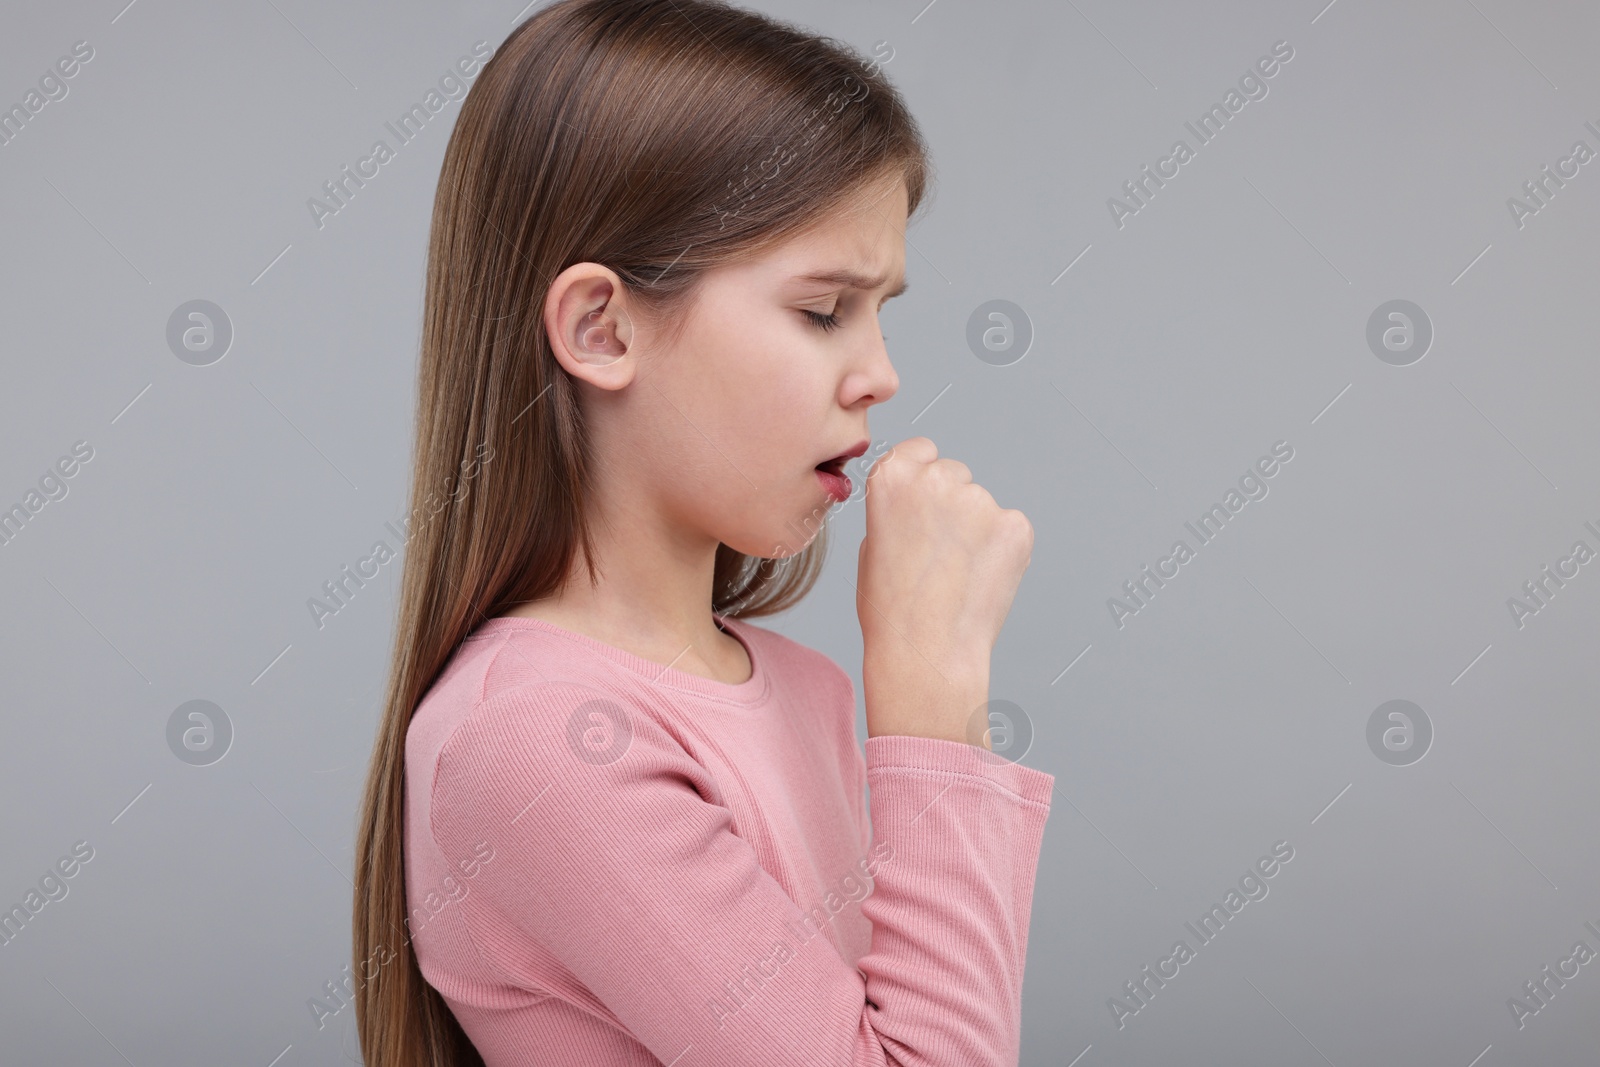 Photo of Sick girl coughing on gray background, space for text